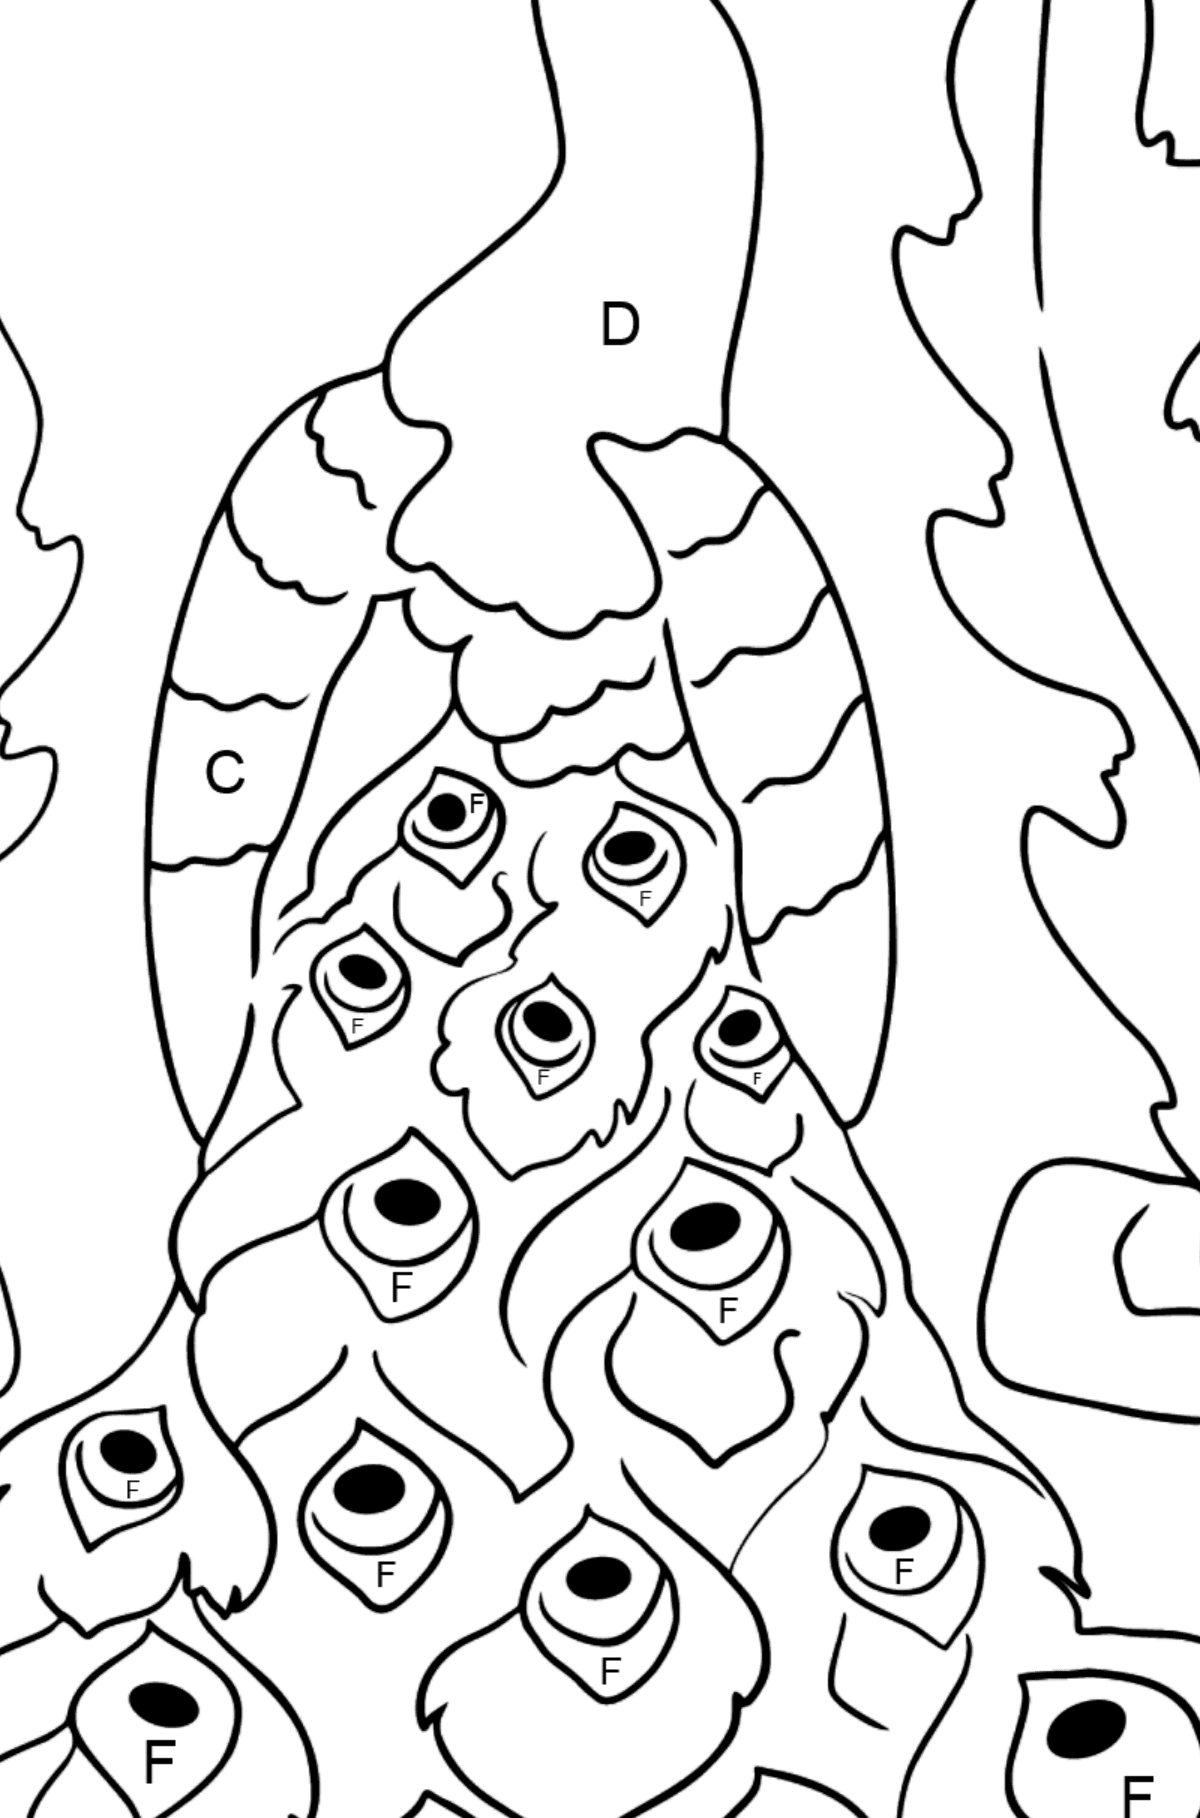 A Pompous and Haughty Peacock Coloring Page - Coloring by Letters for Kids